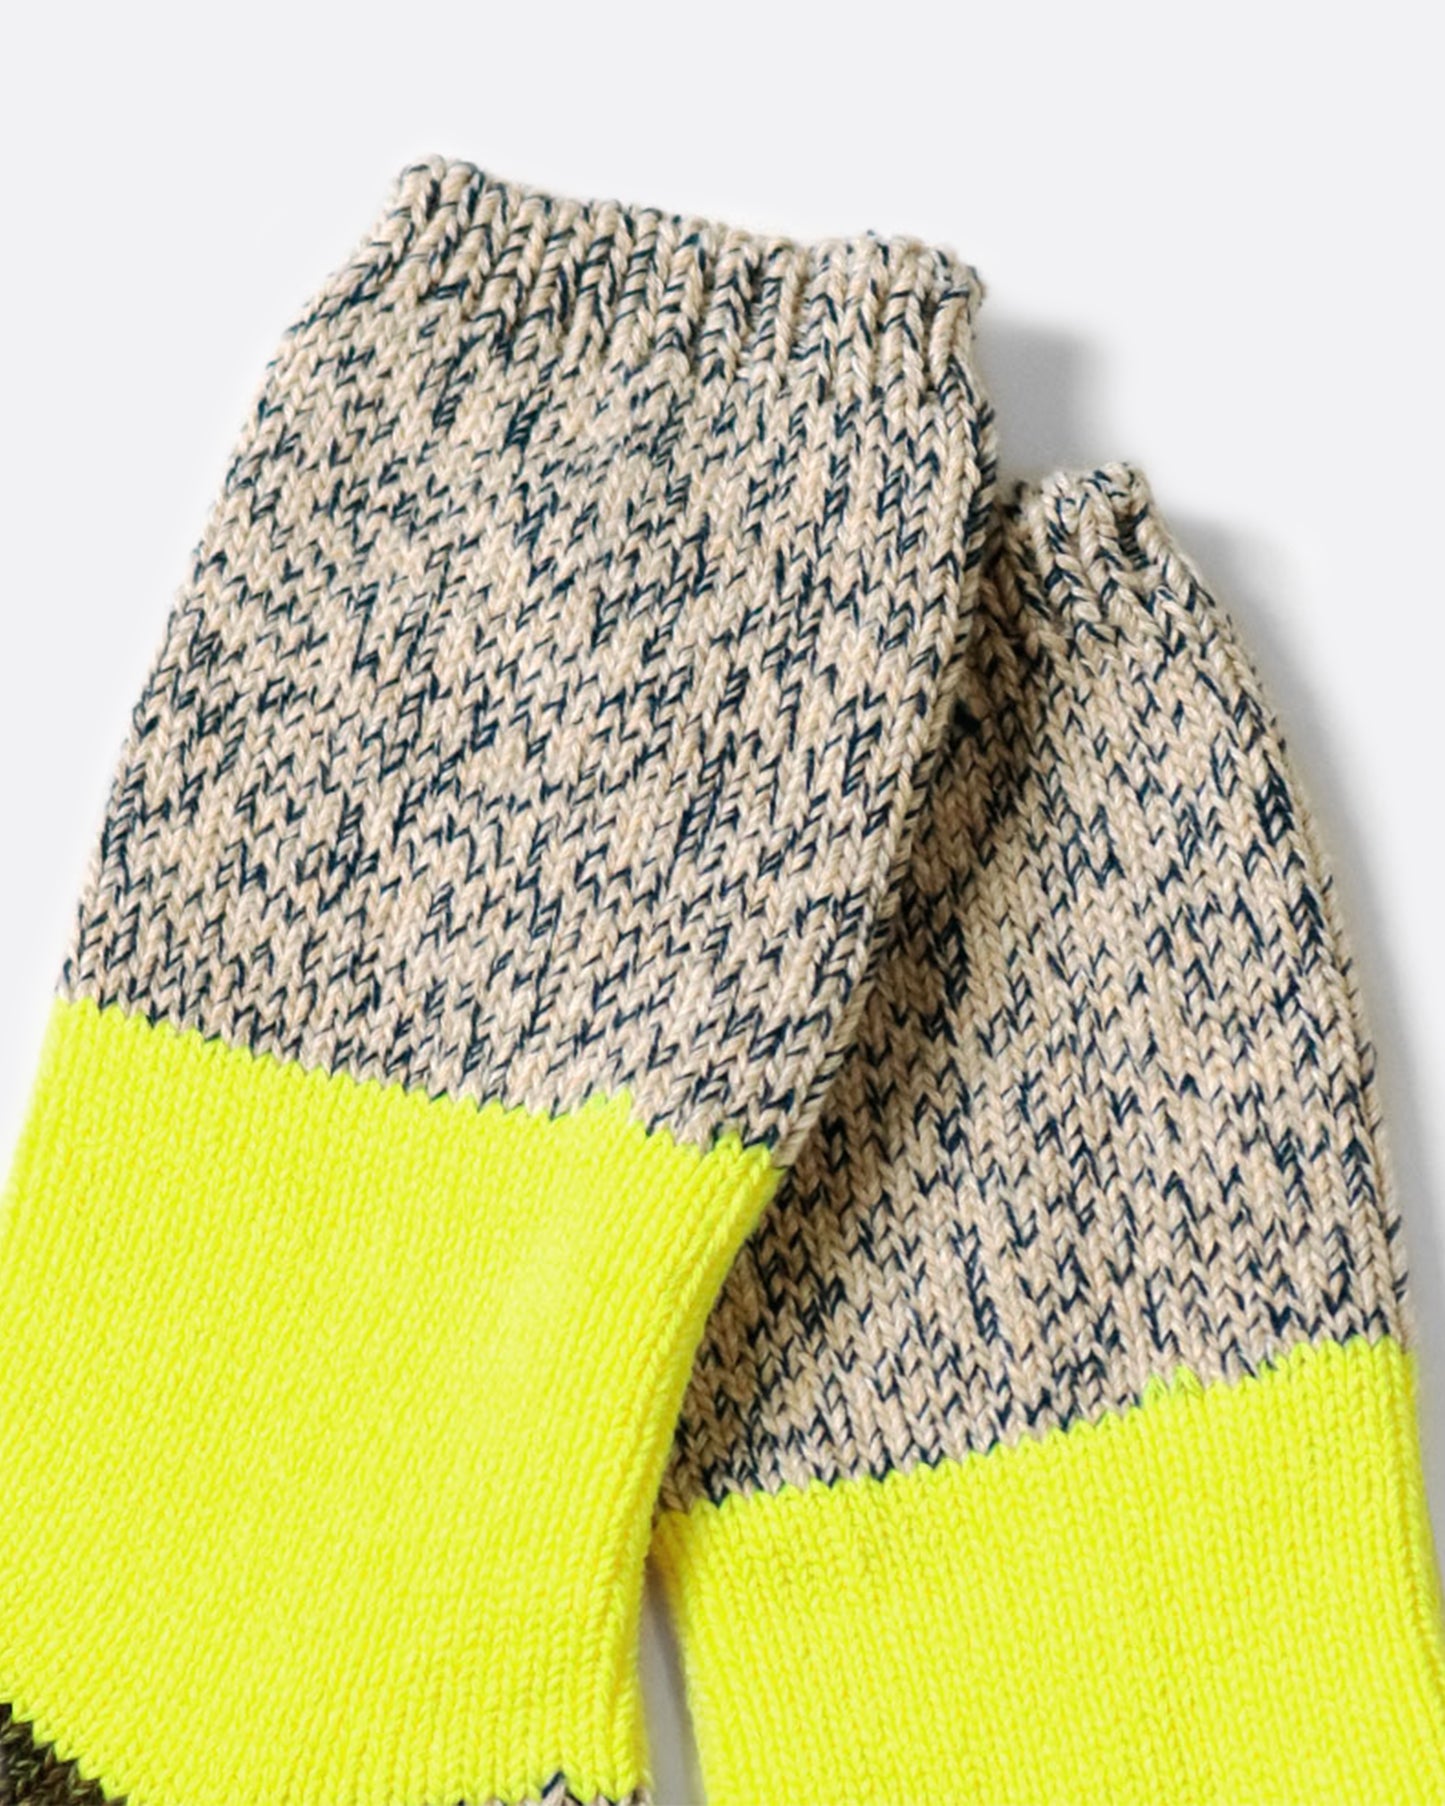 These thick heather gray socks are rich and fluffy with wide neon yellow and olive green stripes down the center.